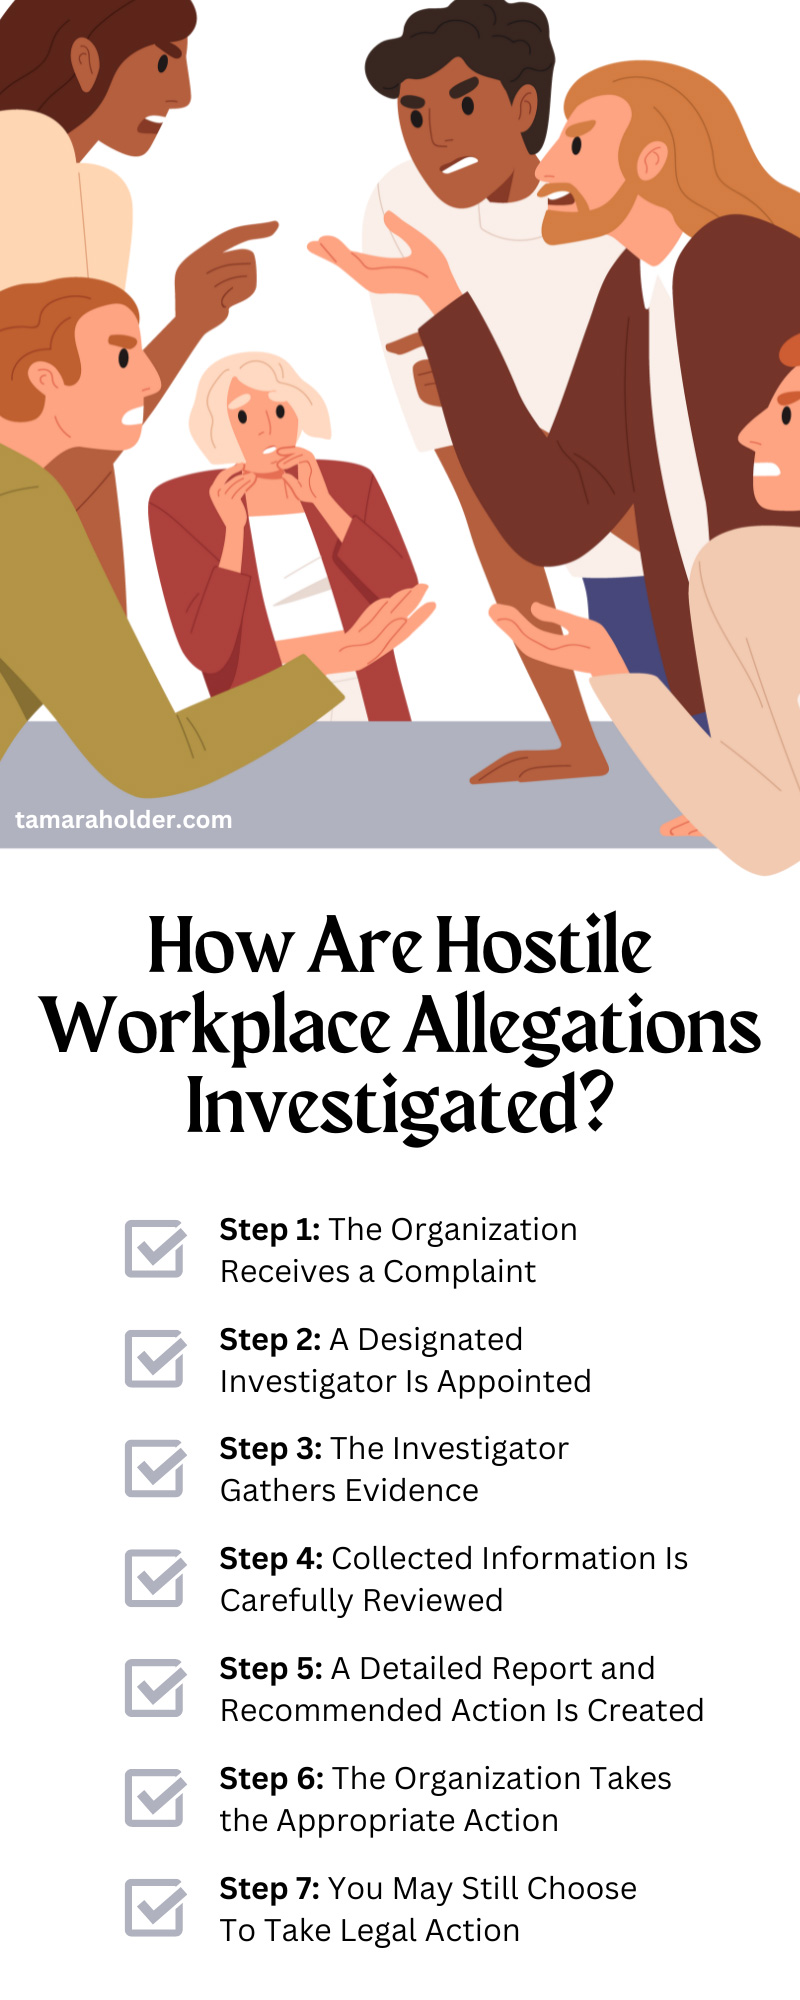 How Are Hostile Workplace Allegations Investigated?